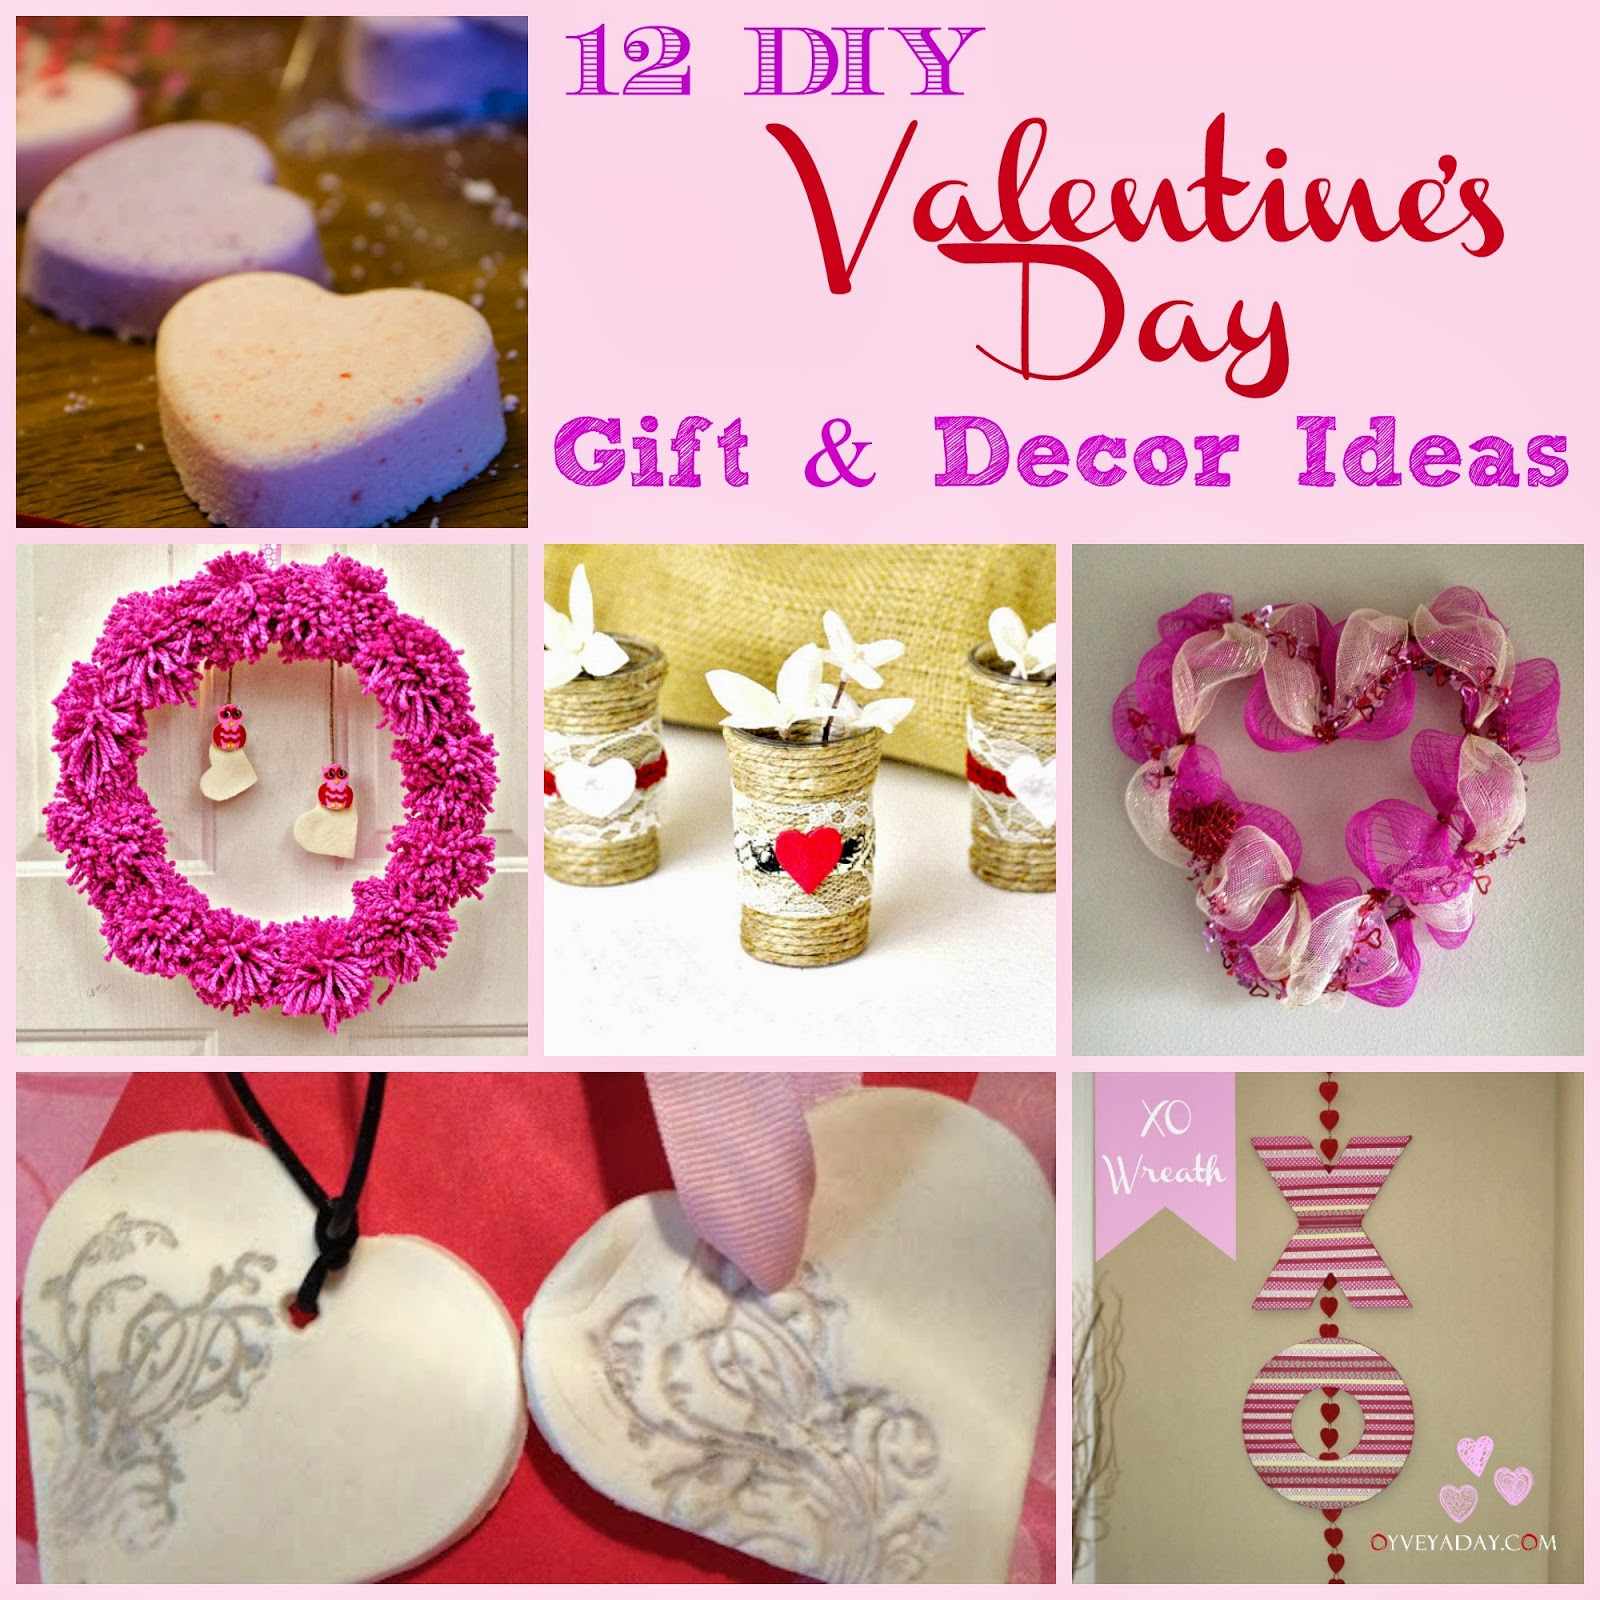 Valentine Day Homemade Gift Ideas
 12 DIY Valentine s Day Gift & Decor Ideas Outnumbered 3 to 1